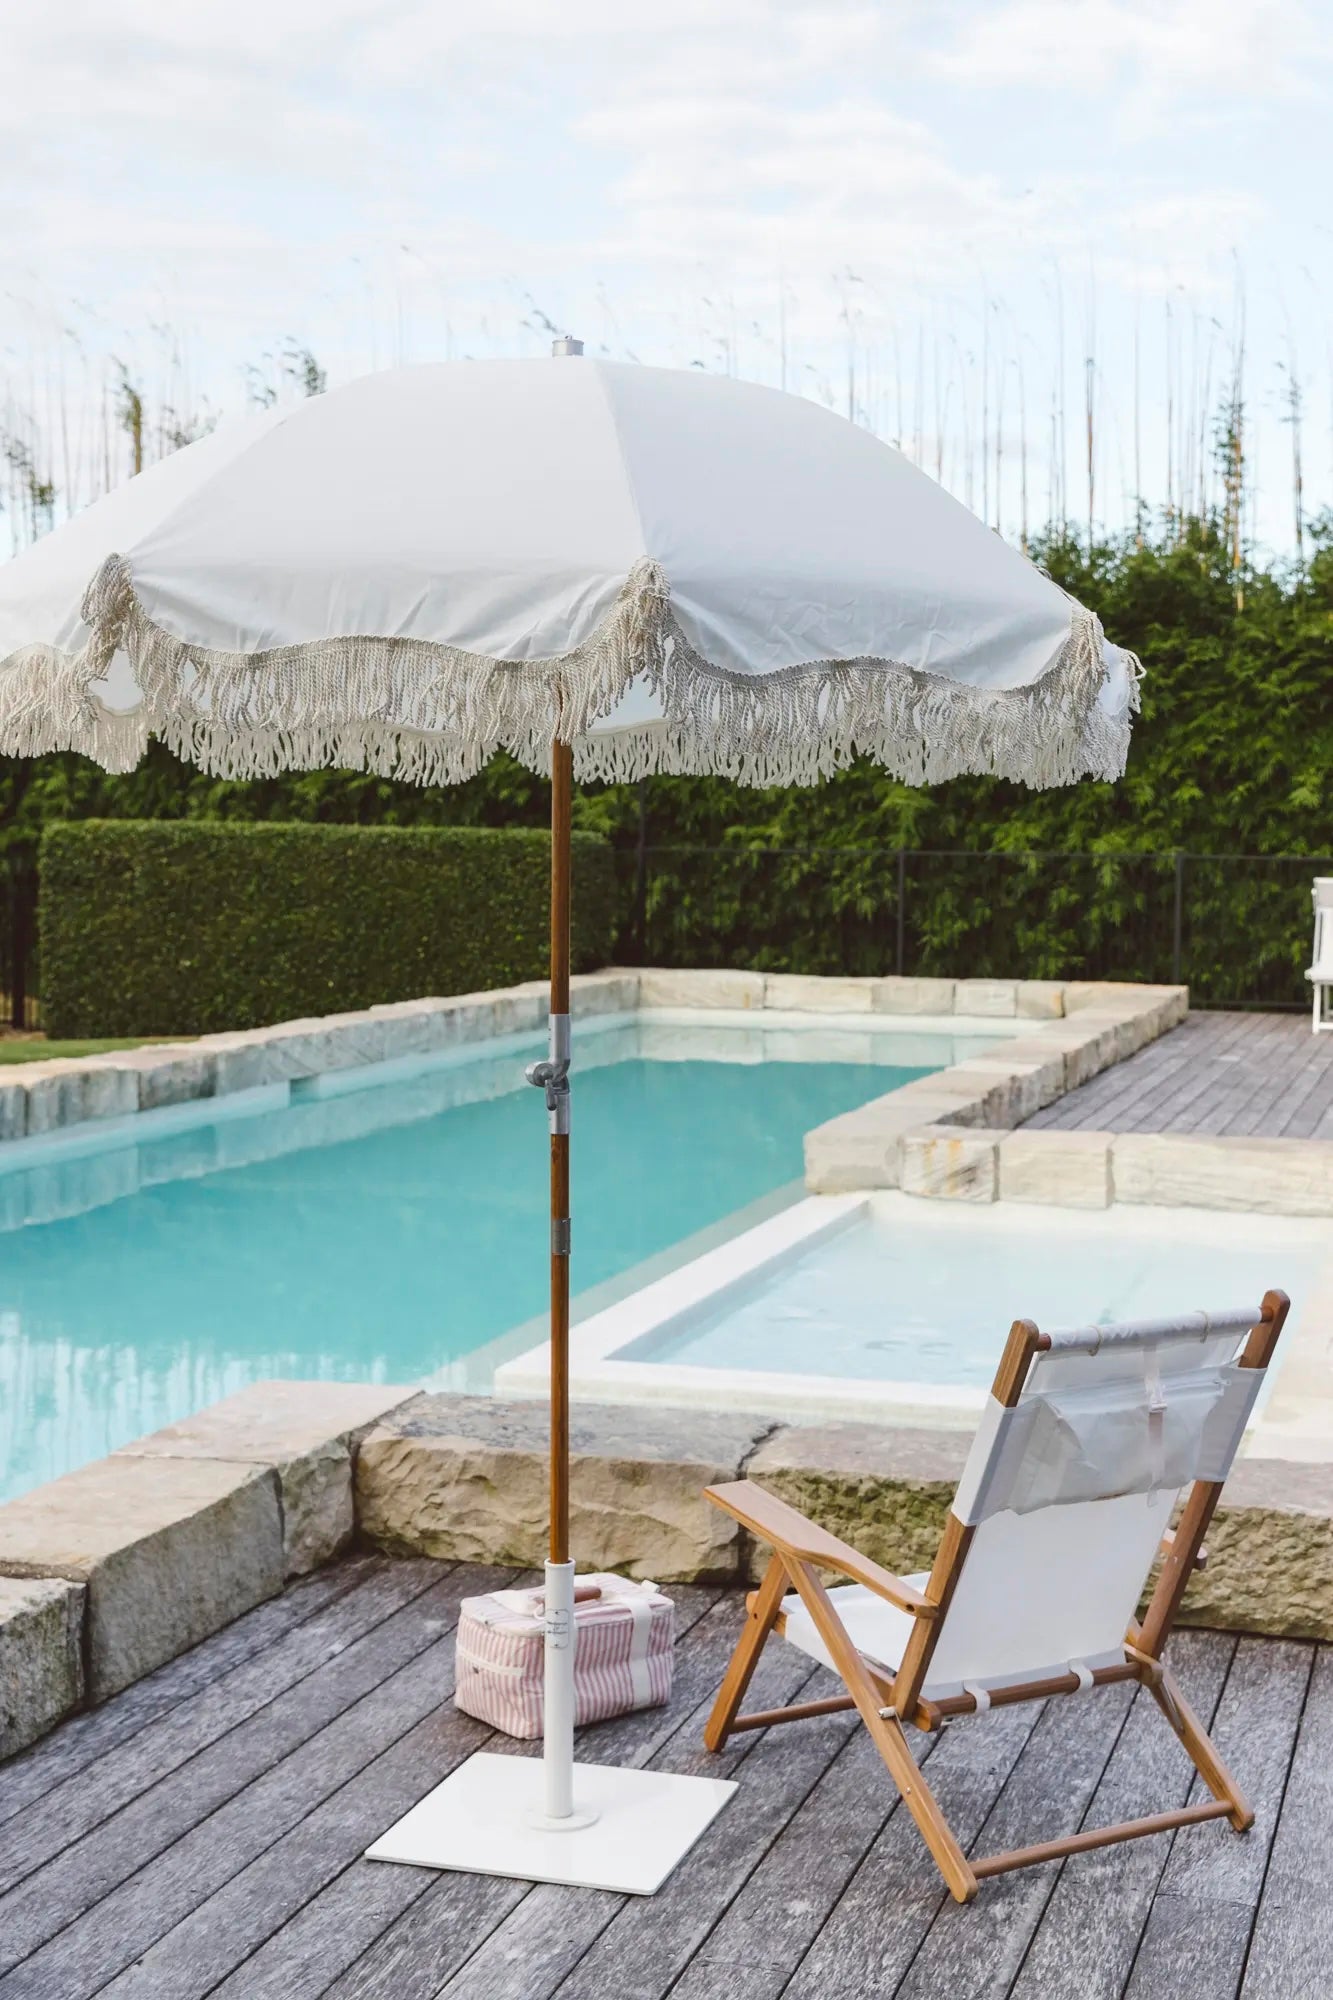 White premium umbrella with a chair and cooler poolside